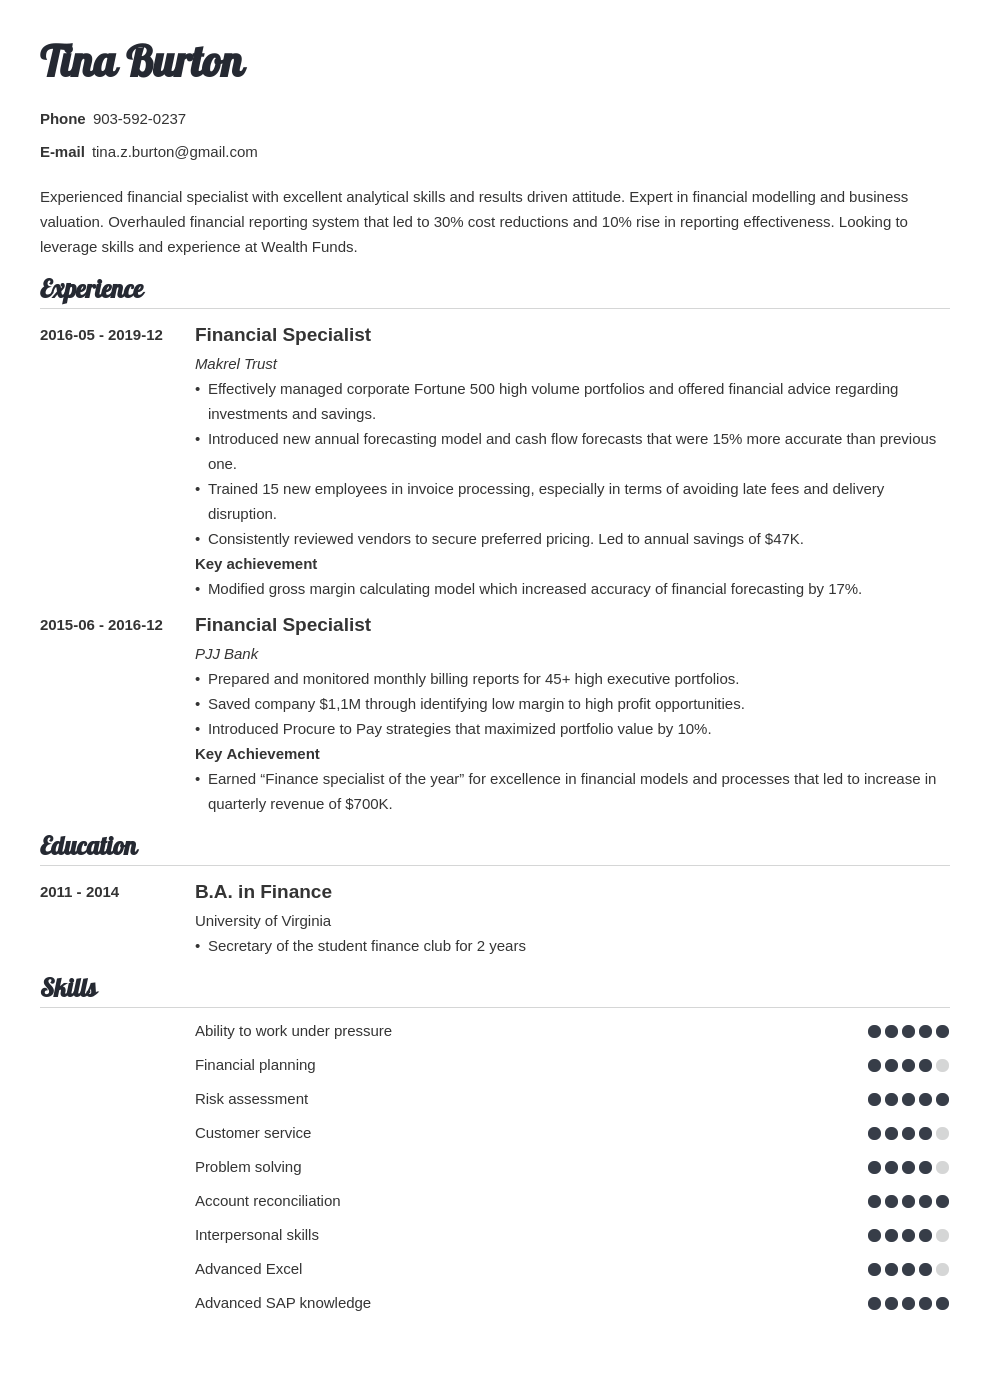 Finance Resume Format from cdn-images.zety.com